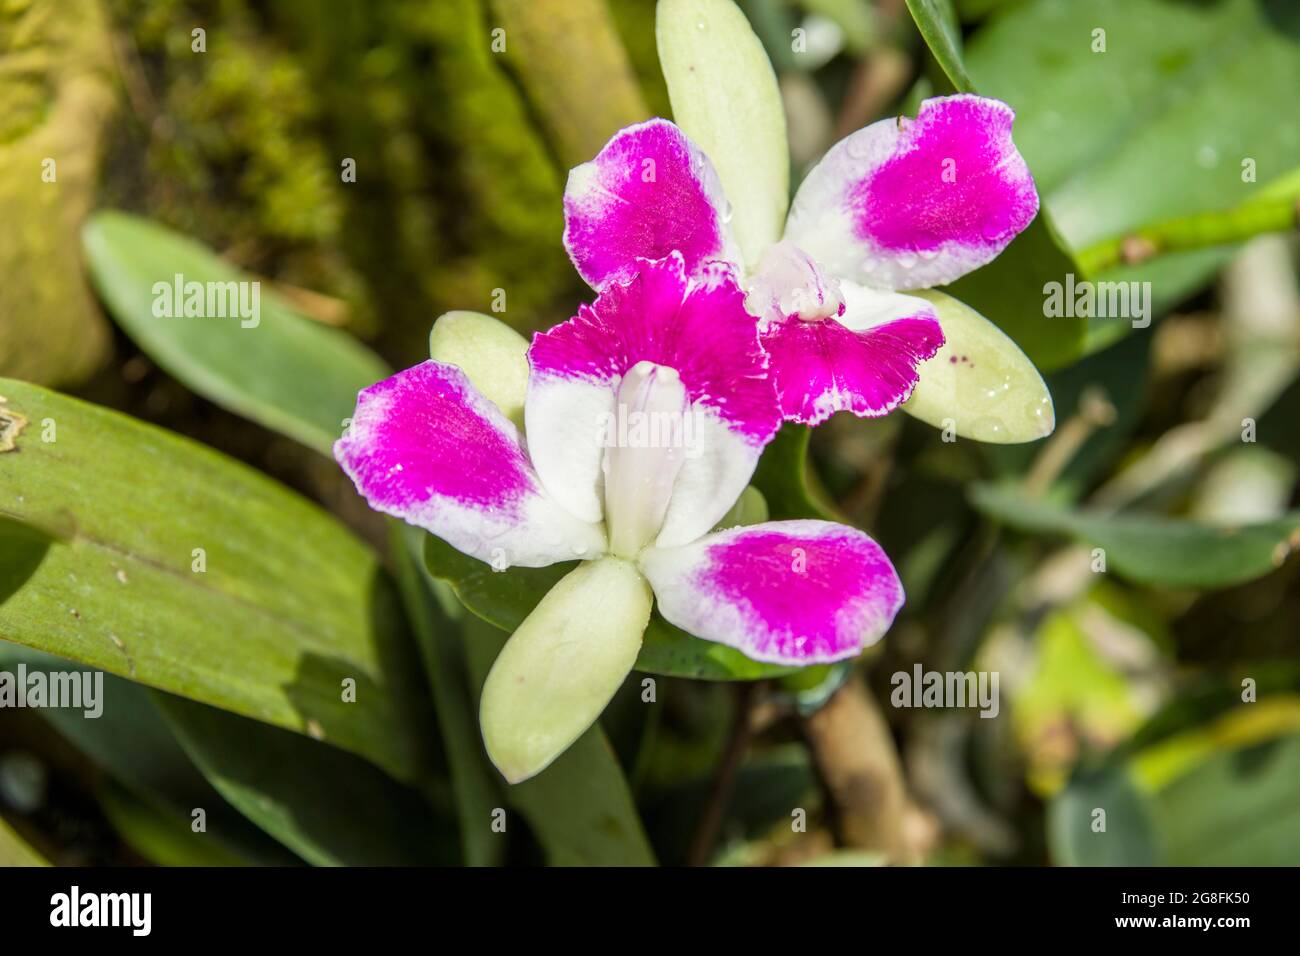 Cattleya Yen Corona has often been called the Queen of Orchids. With proper care, a Cattleya plant can be grown on indefinitely and can be flowered Stock Photo